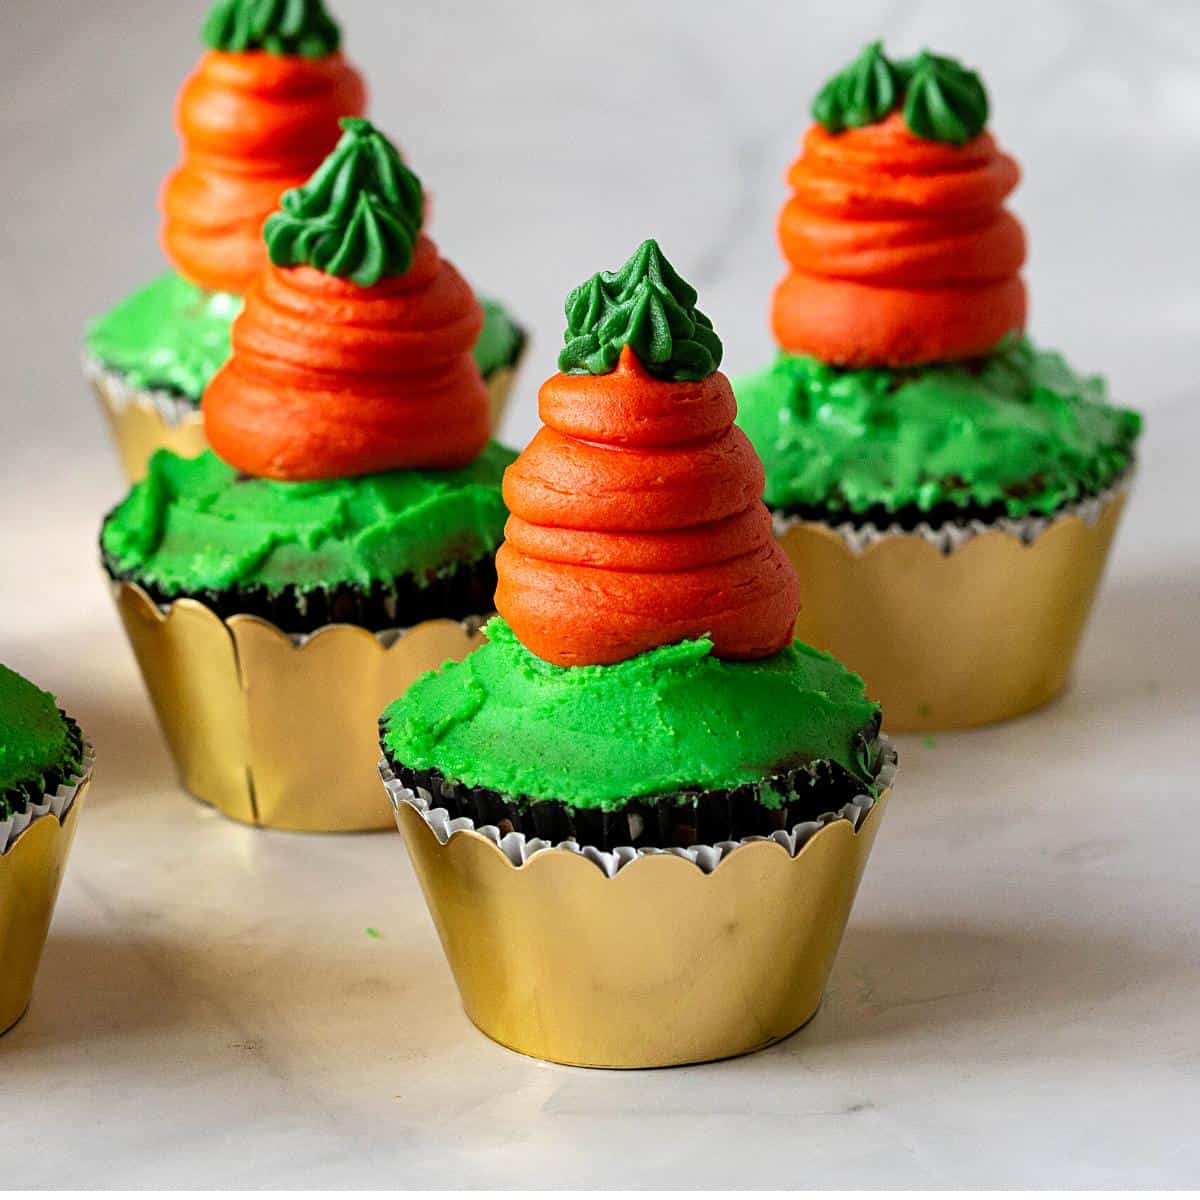 Carrot frosted cucpakes.